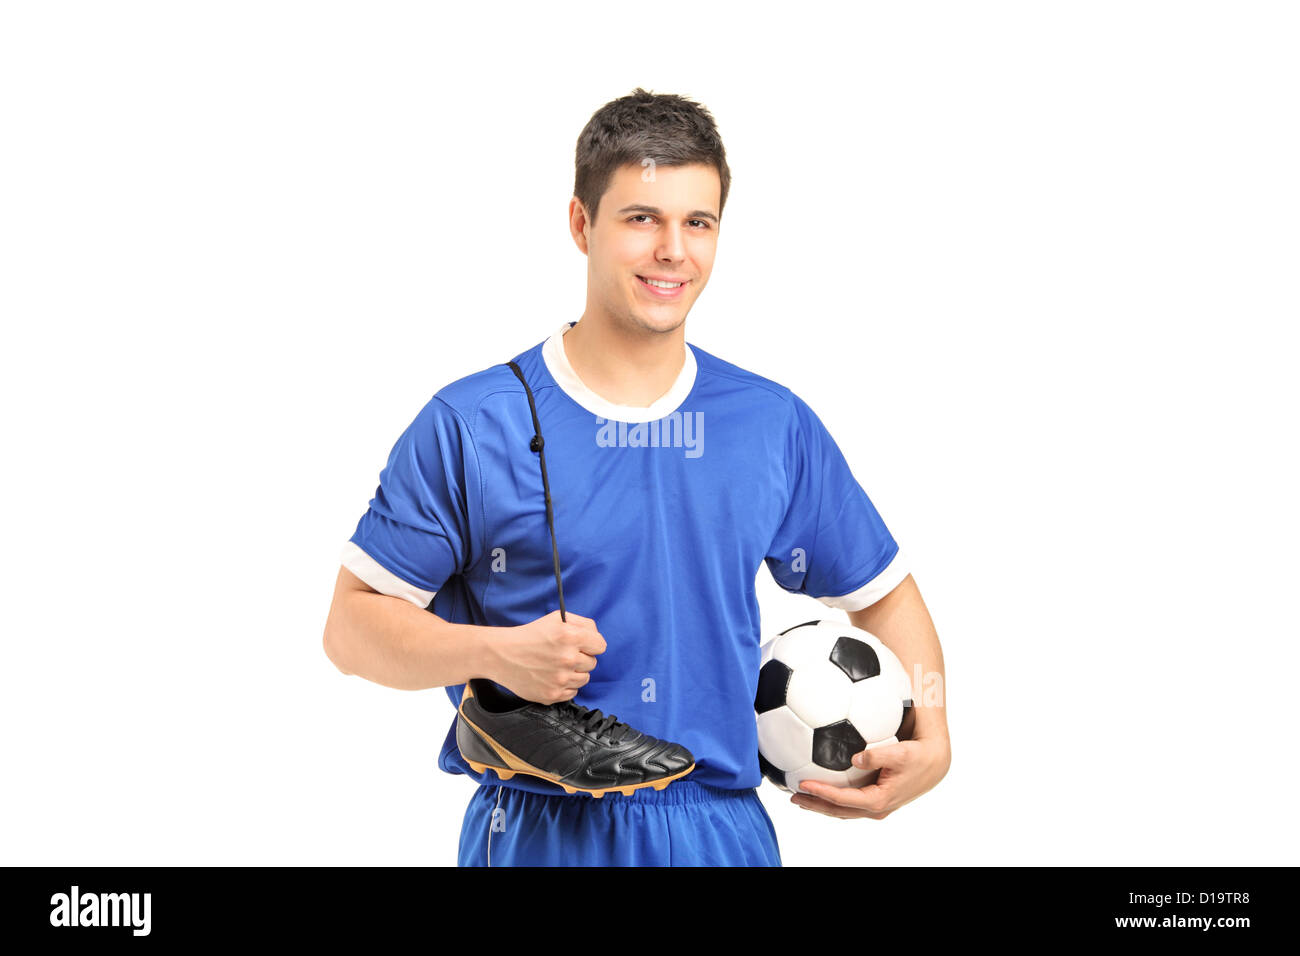 A smiling footballer in sport wear holding a soccer shoes and football isolated on white background Stock Photo